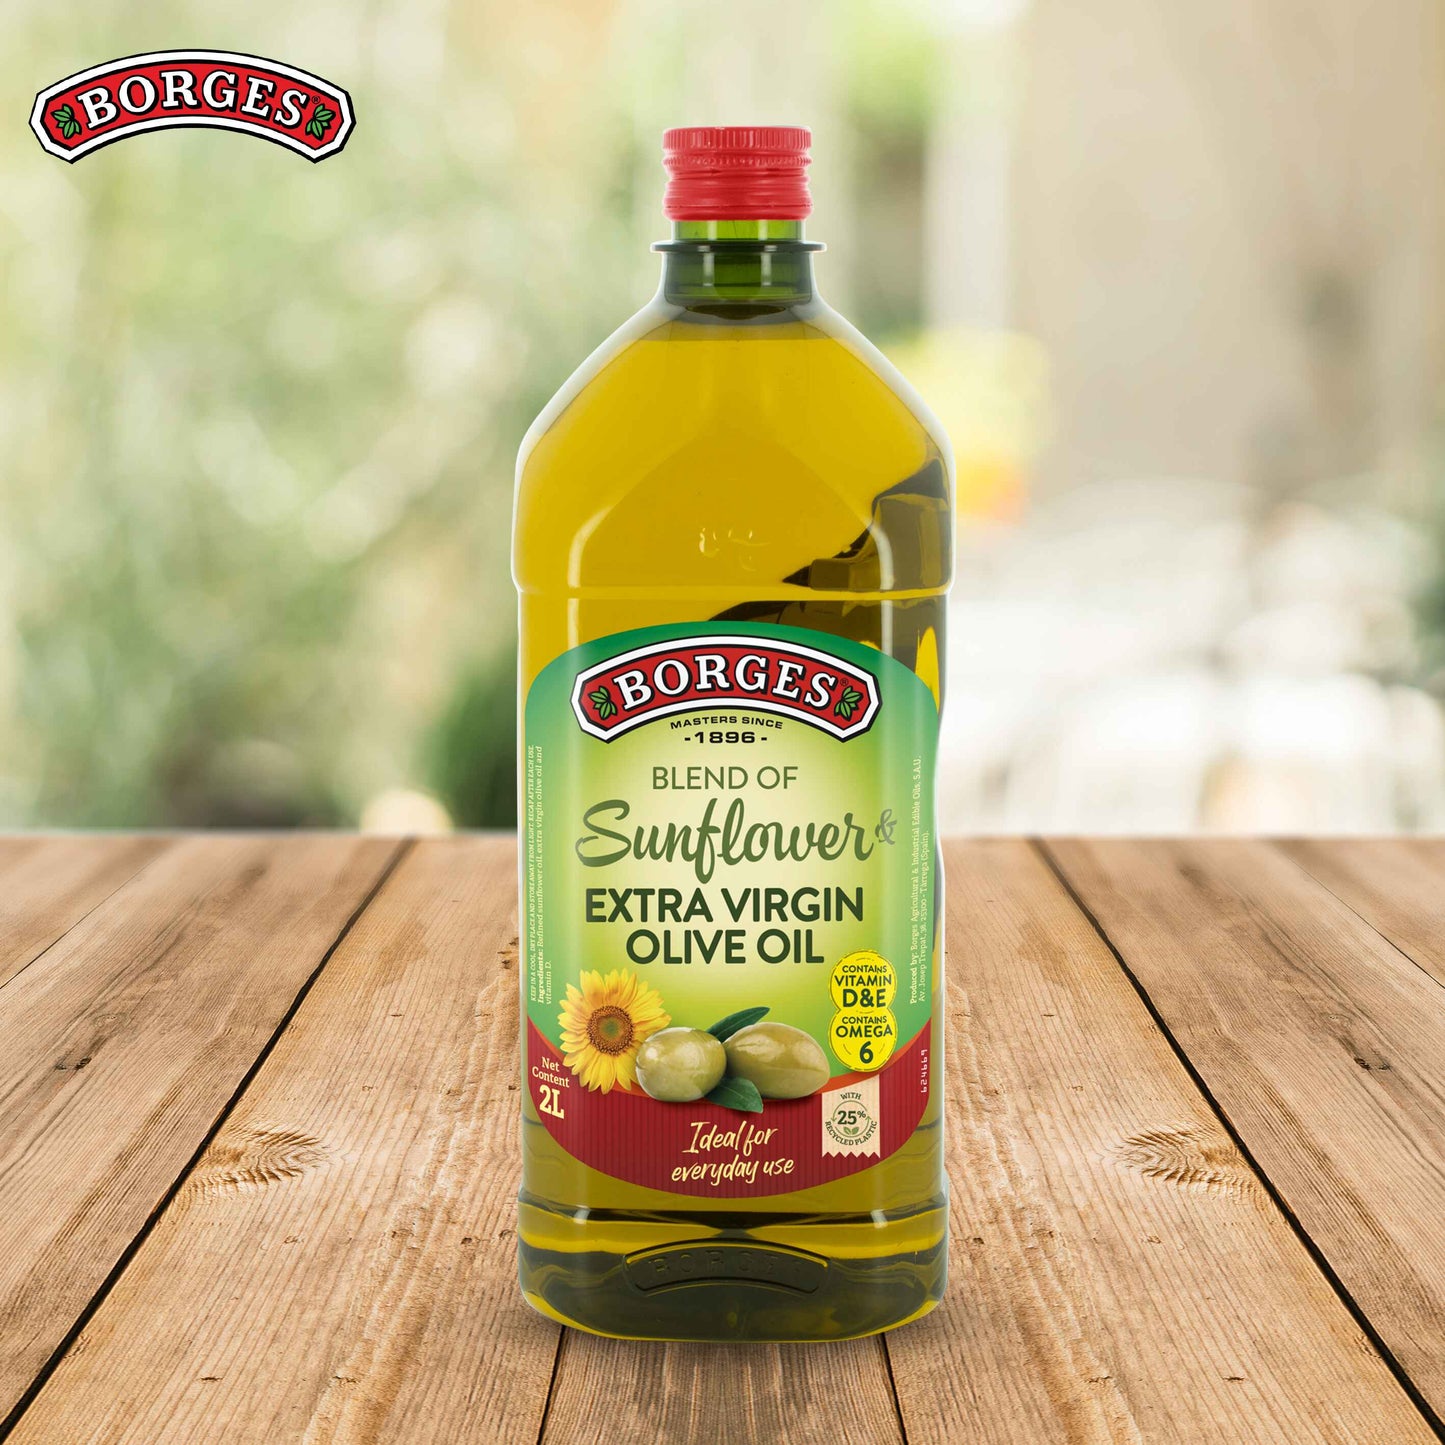 BORGES Sunflower and Extra Virgin Olive Oil 2L - Bloom Concept